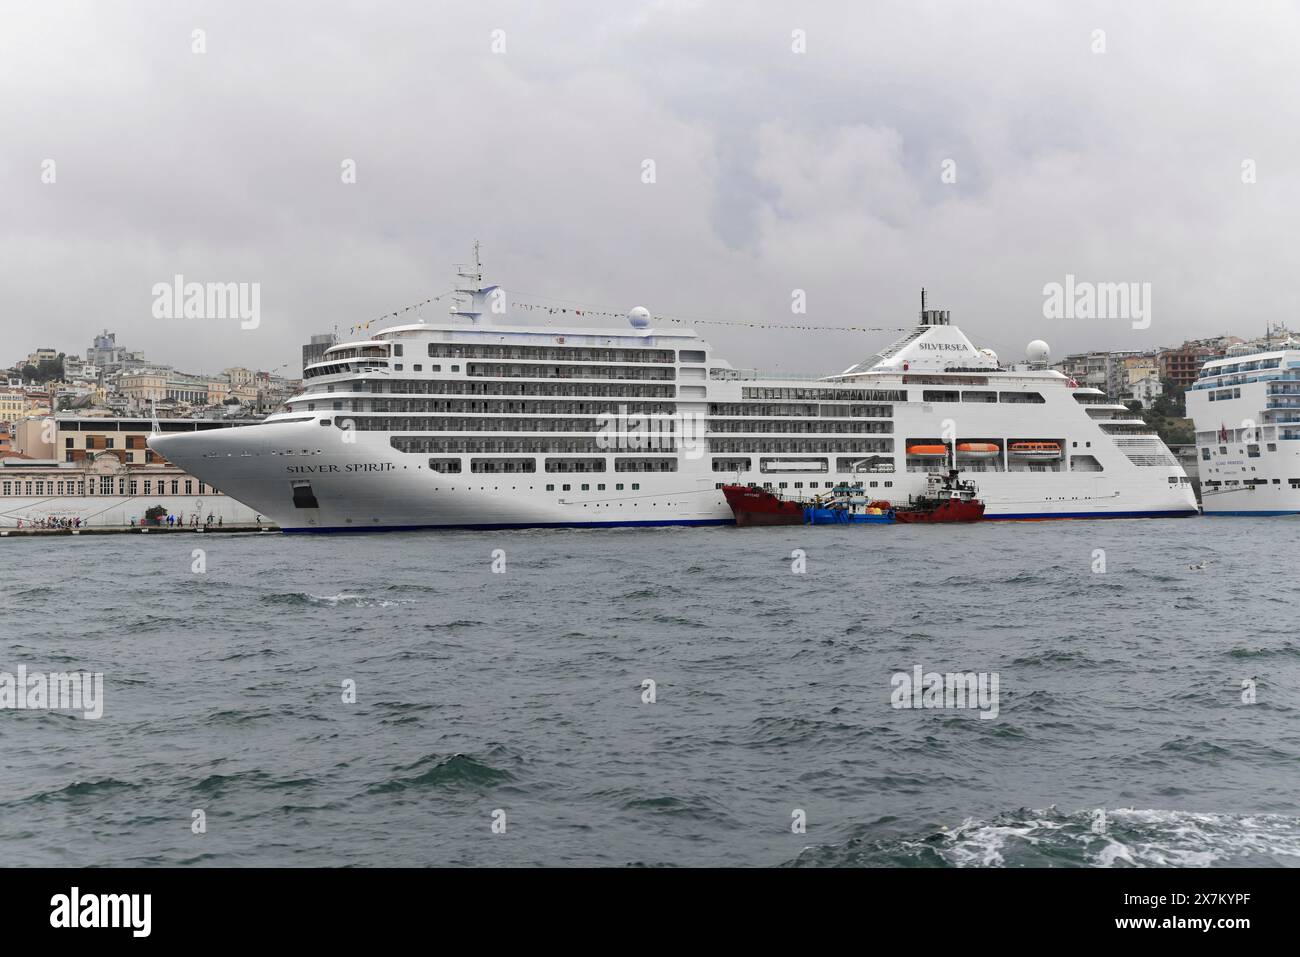 White cruise ship SIVER SPIRIT, with several decks on a rough sea on a grey day, Istanbul Modern, Istanbul, Turkey Stock Photo